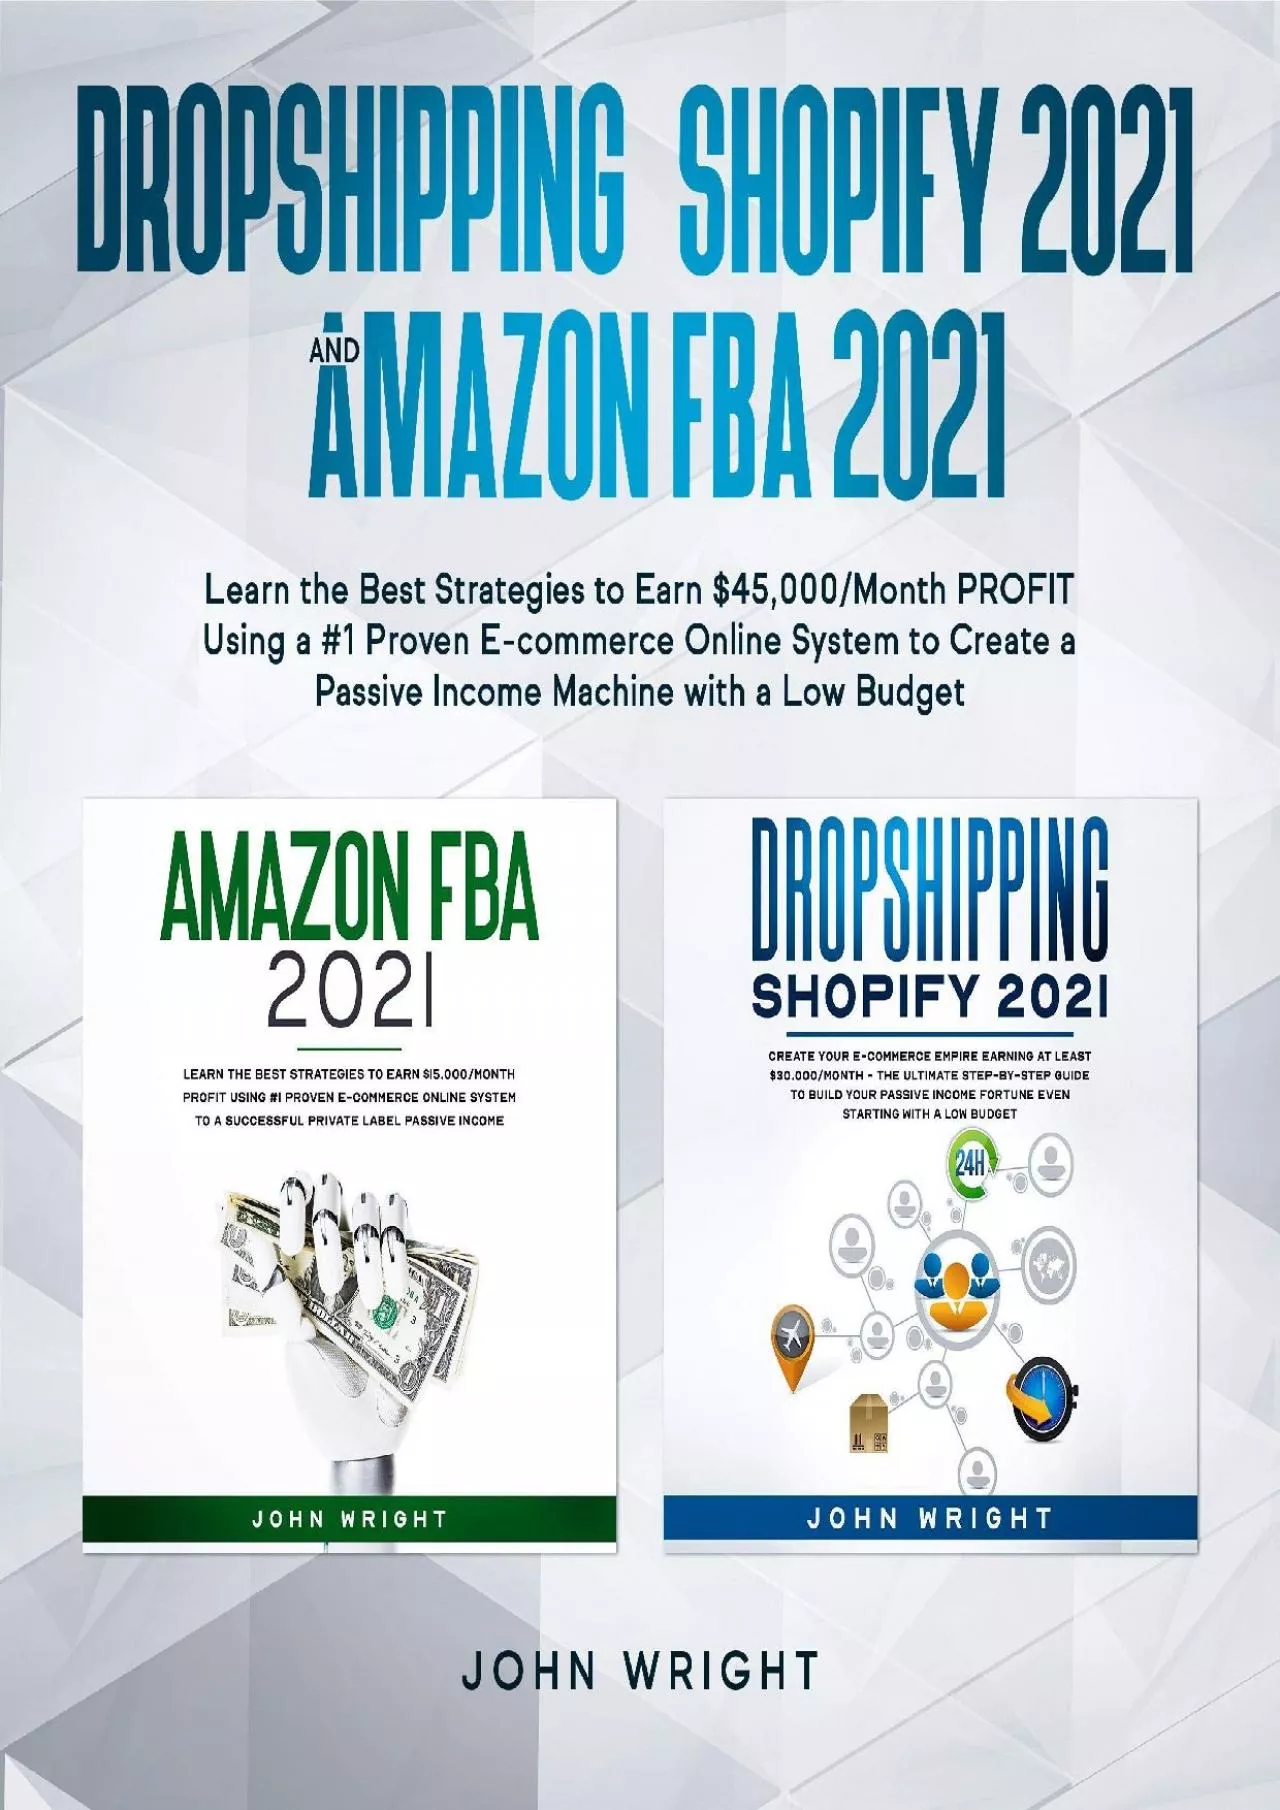 Dropshipping Shopify 2021 and Amazon FBA 2021 Learn the Best Strategies to Earn 45,000Month